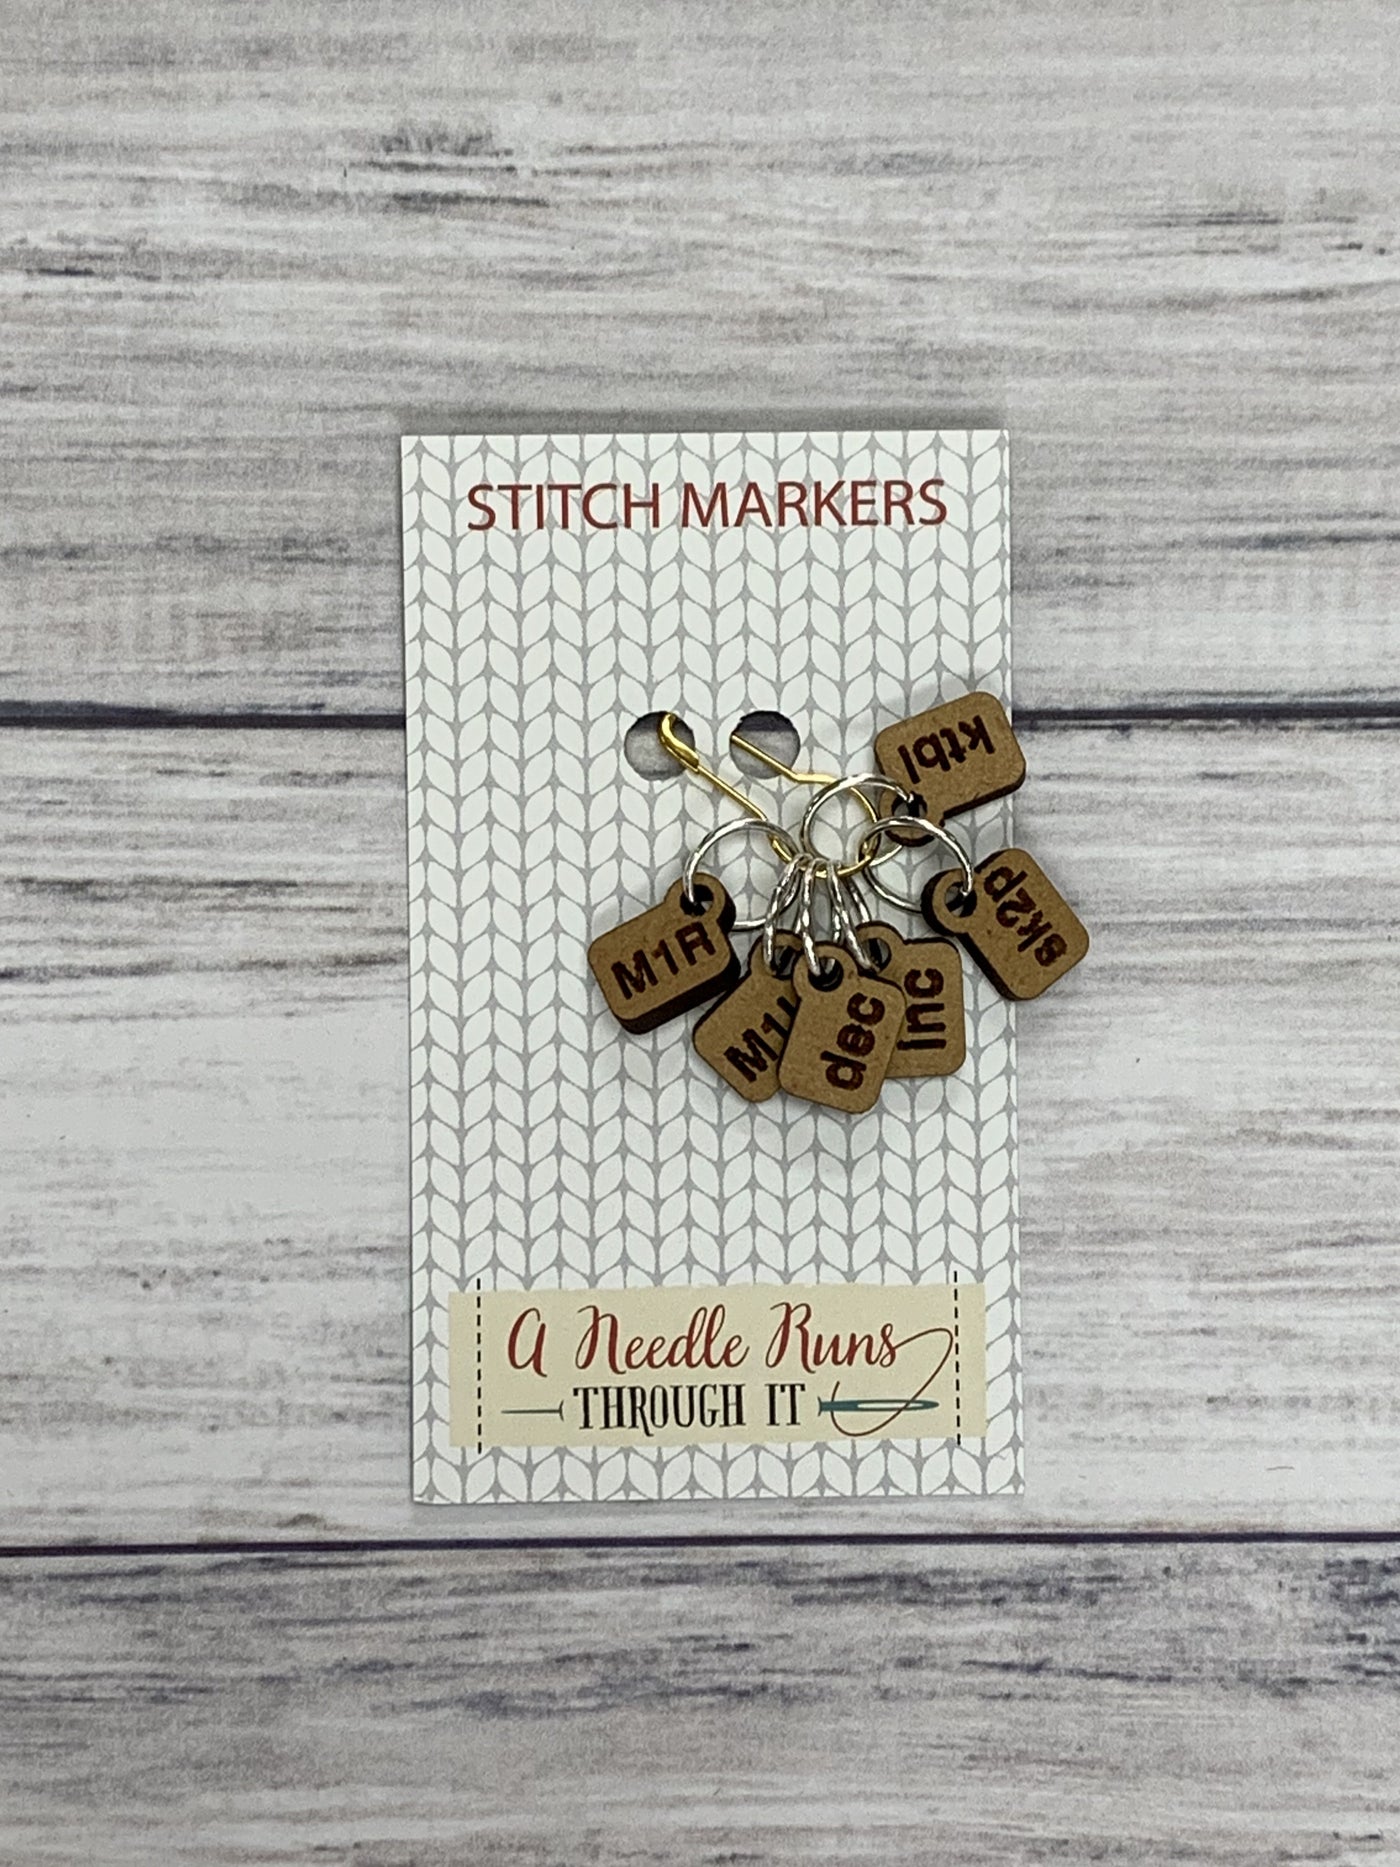 Wooden Ring Stitch Markers by A Needle Runs Though It - Medium